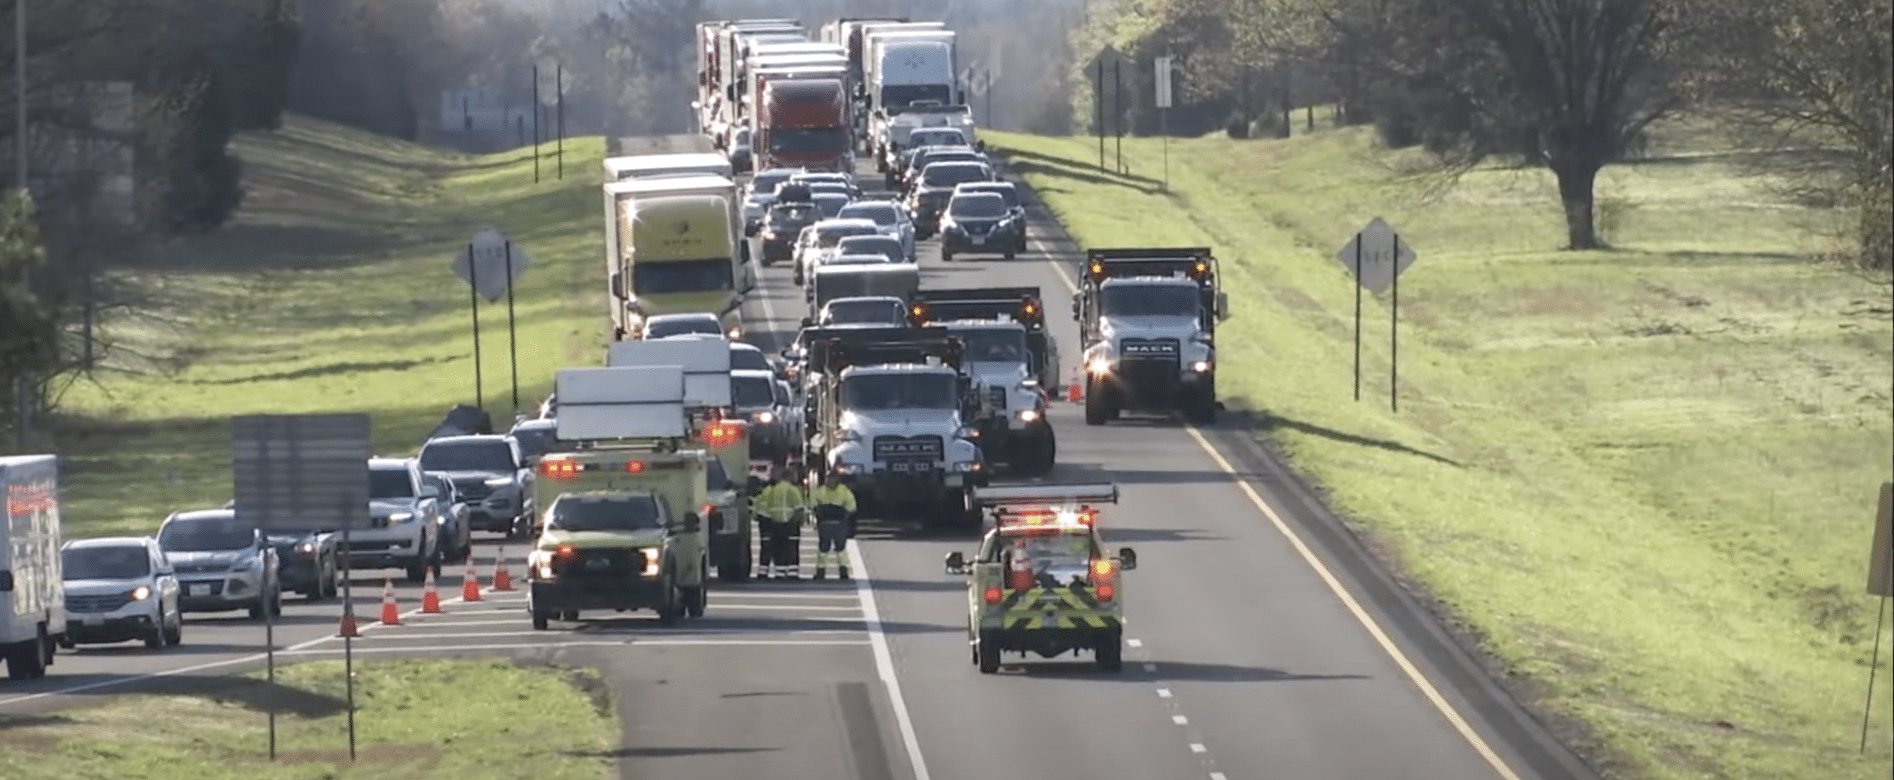 TRAGIC: 6 children dead in Tennessee car crash, all of them were ejected from the vehicle